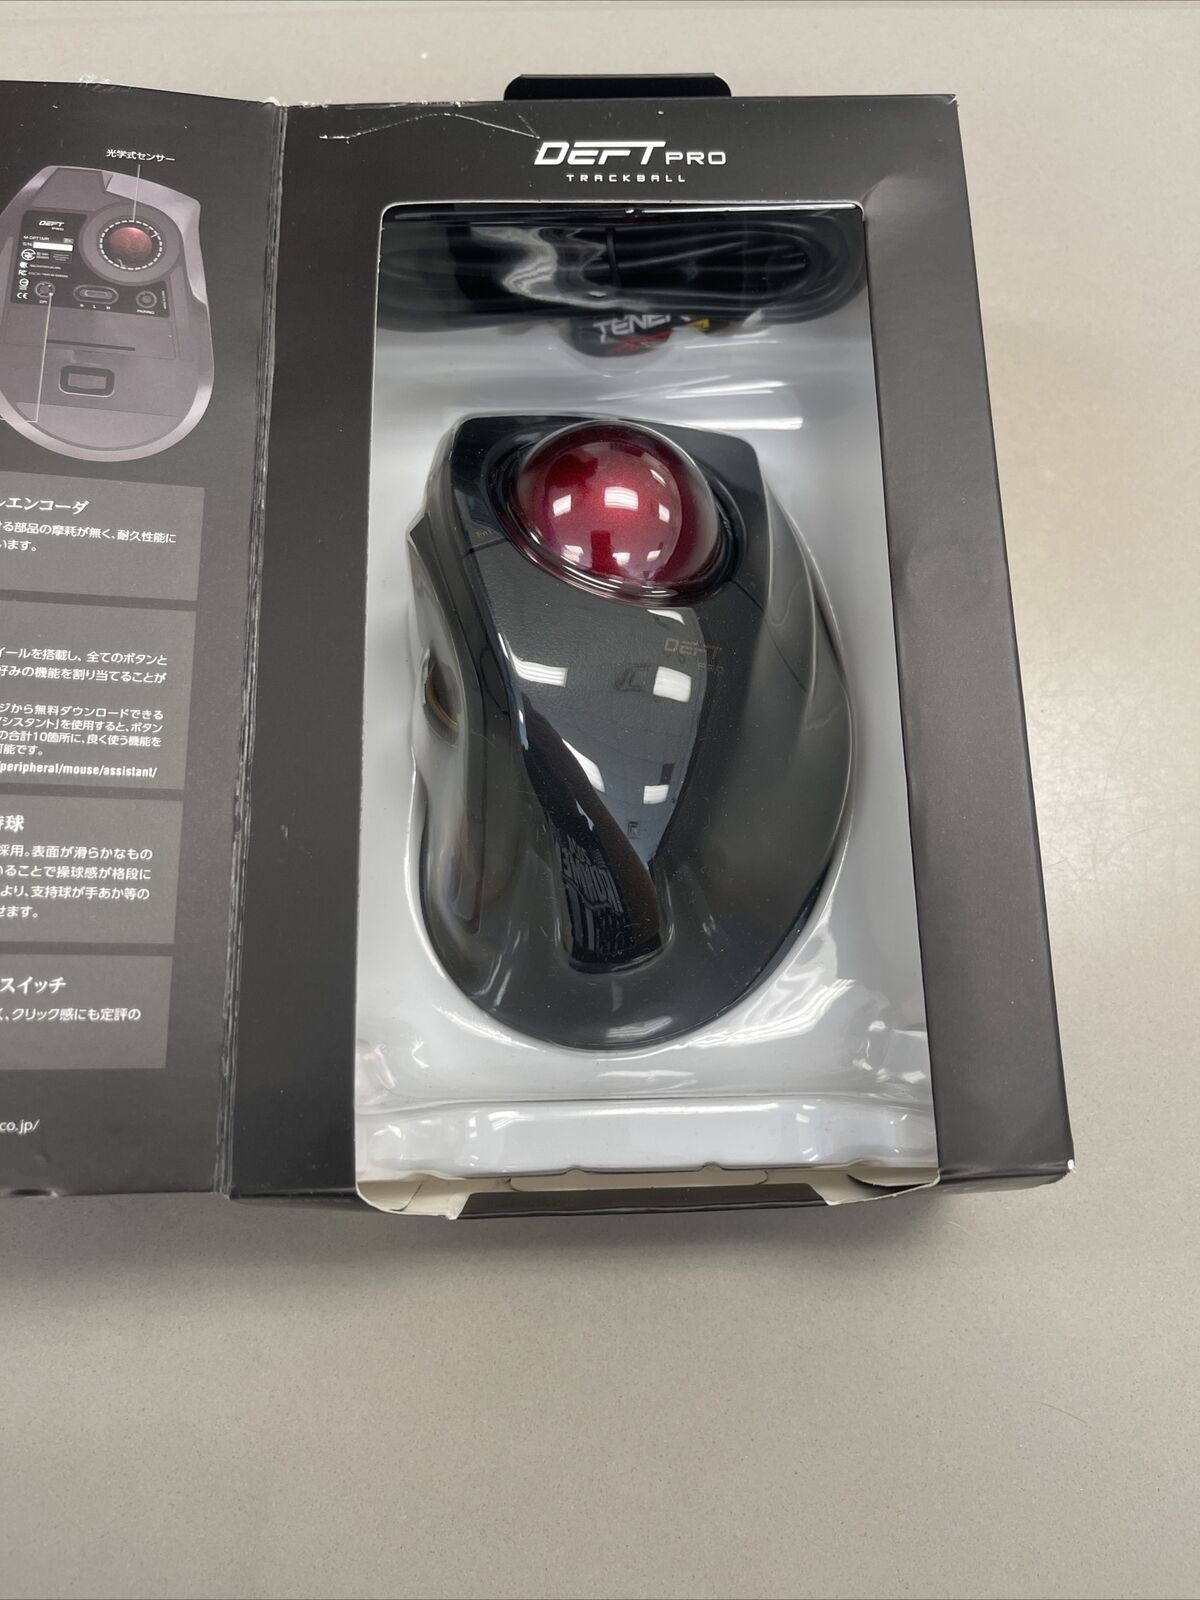 ELECOM DEFT PRO Trackball Mouse, Wired, Wireless, Bluetooth 3 Types Connection